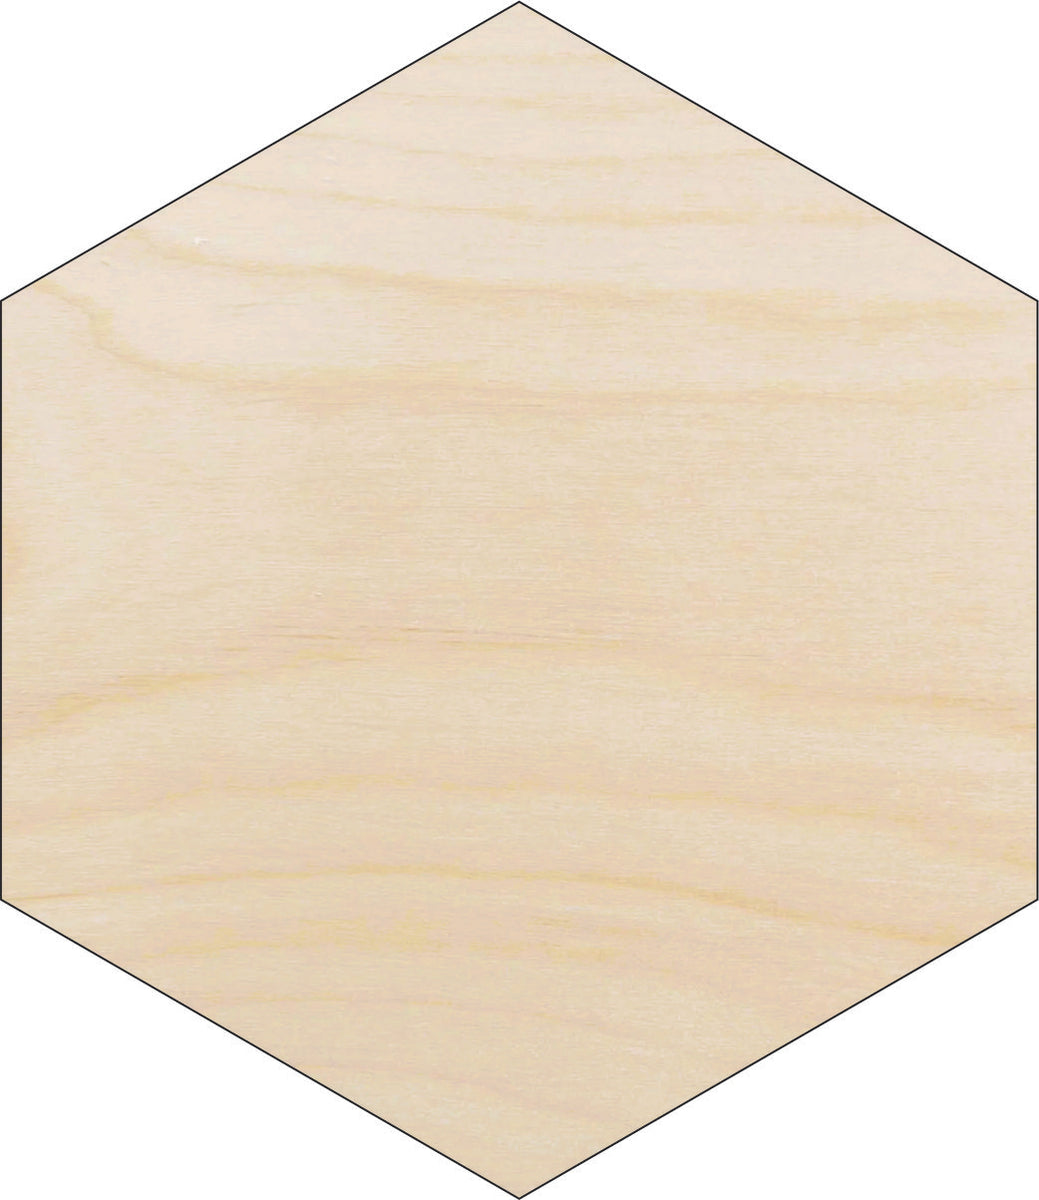 Unfinished Wood Hexagon Shape Craft Up To 24'' DIY 1/8'' Thickness